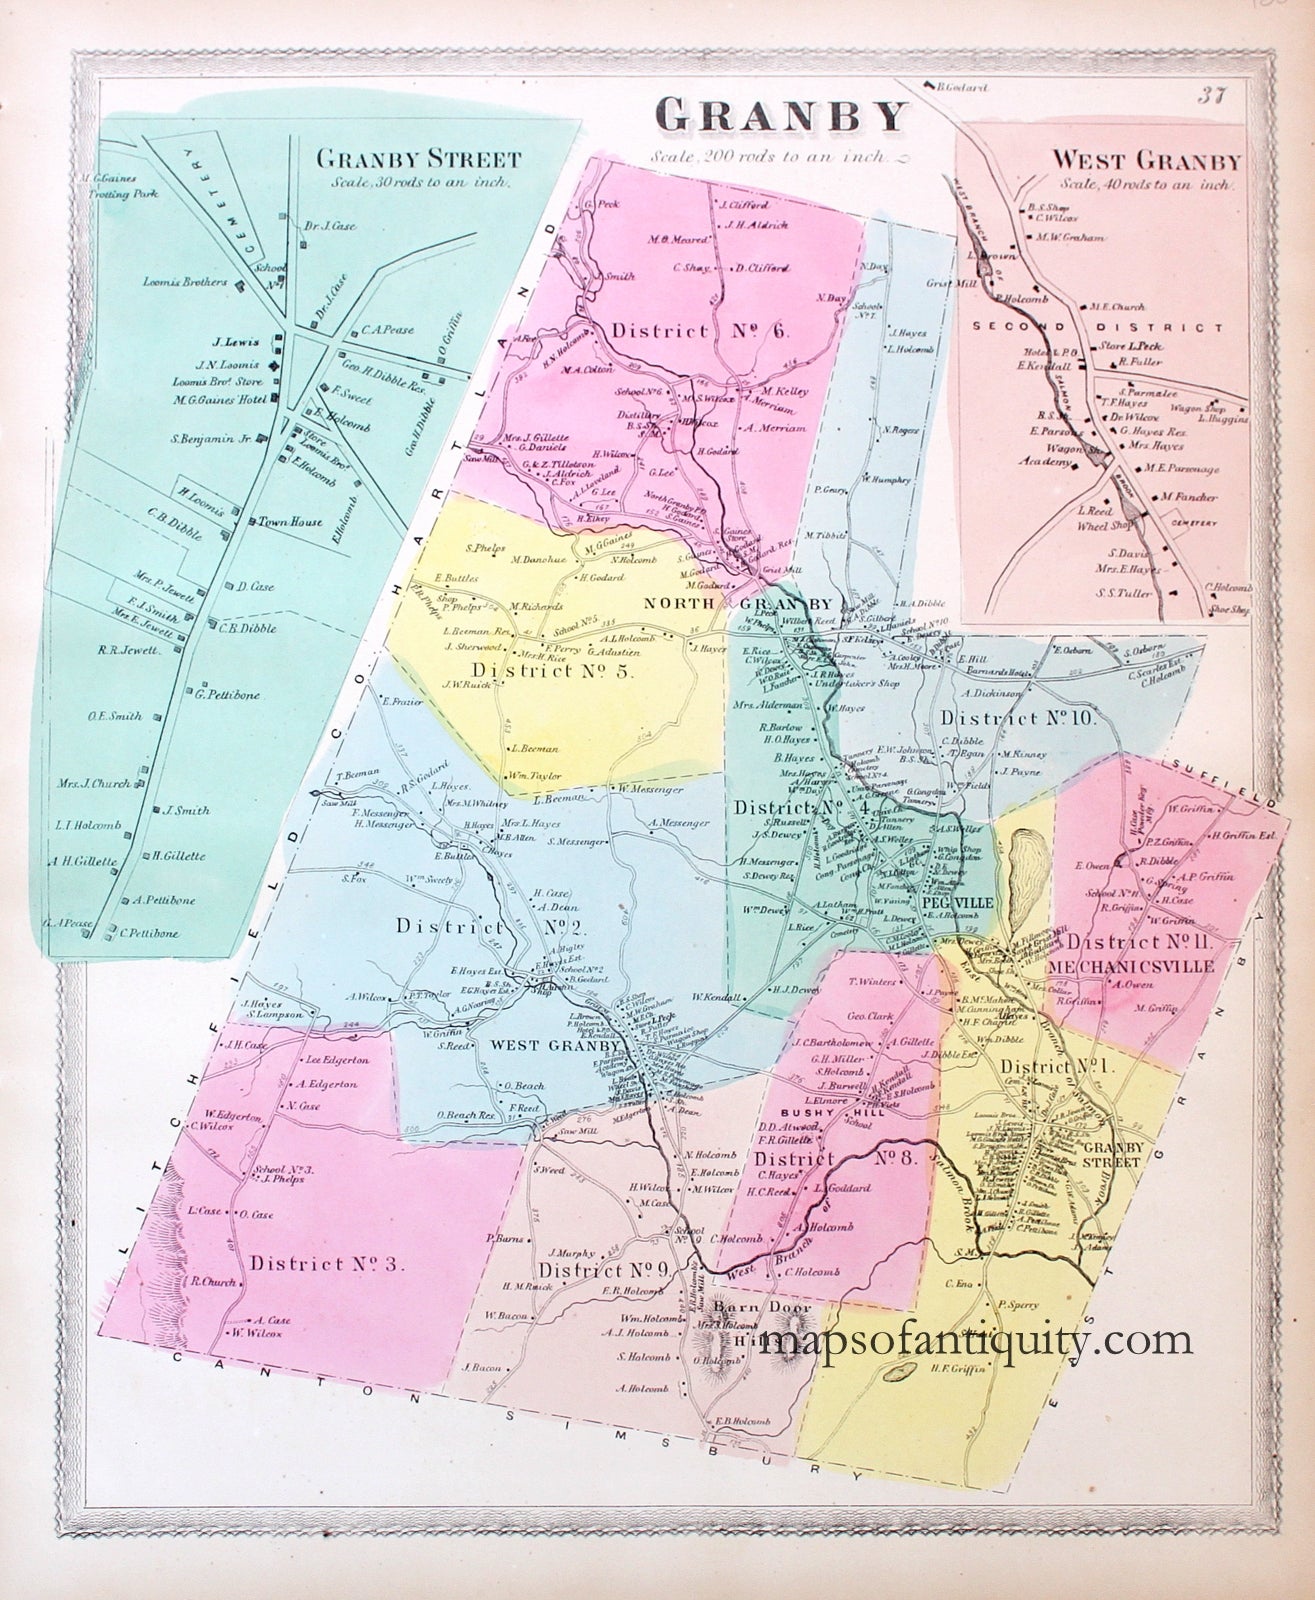 Antique-Hand-Colored-Map-Plan-of-the-town-of-Granby-(CT)-******-United-States-Northeast-1869-Baker-&-Tilden-Maps-Of-Antiquity